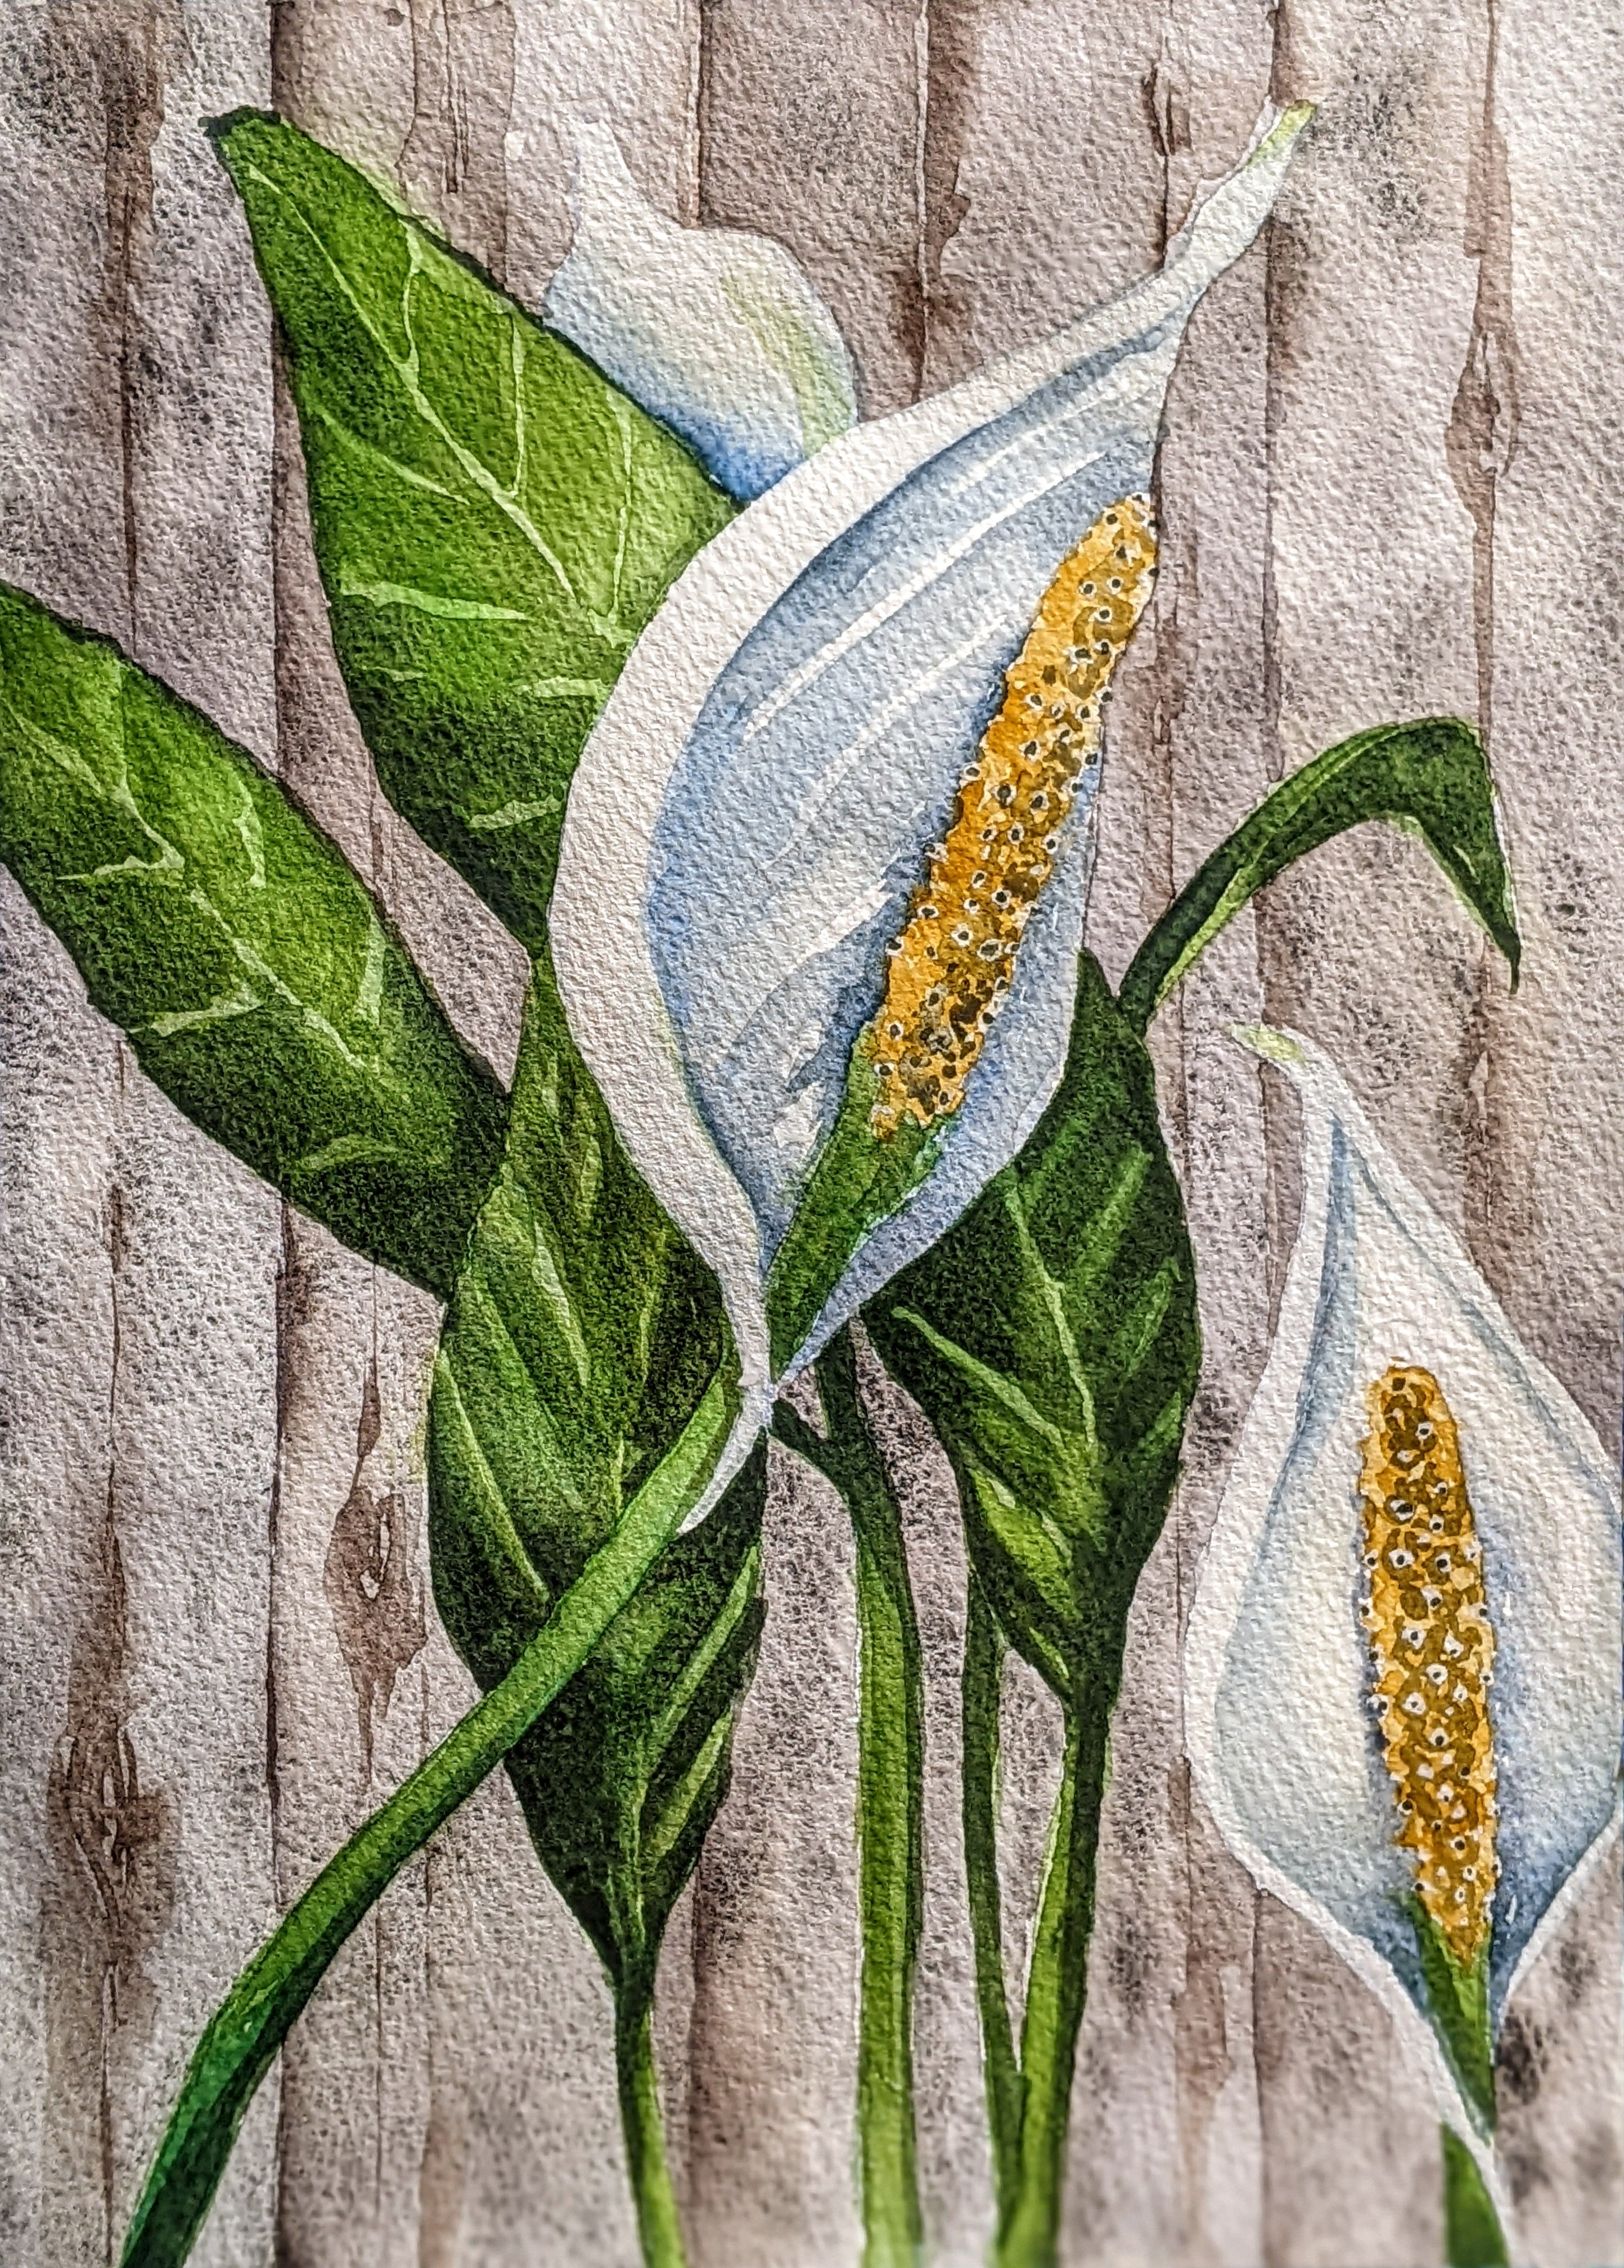 lily painting watercolor